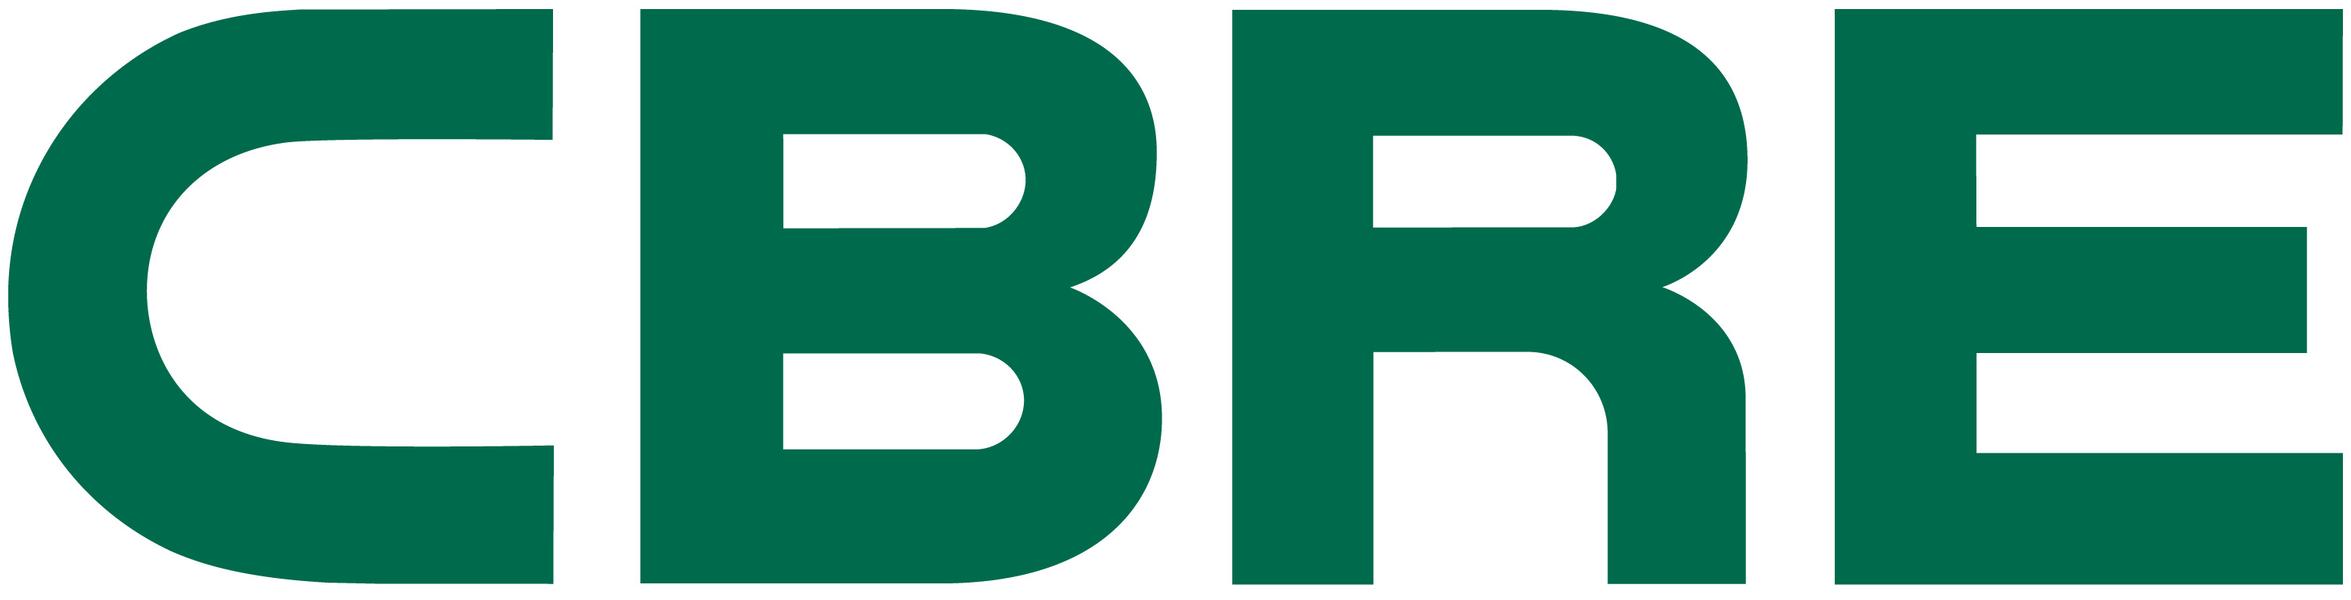 Cbre Appoints Leah C Stearns As Chief Financial Officer World